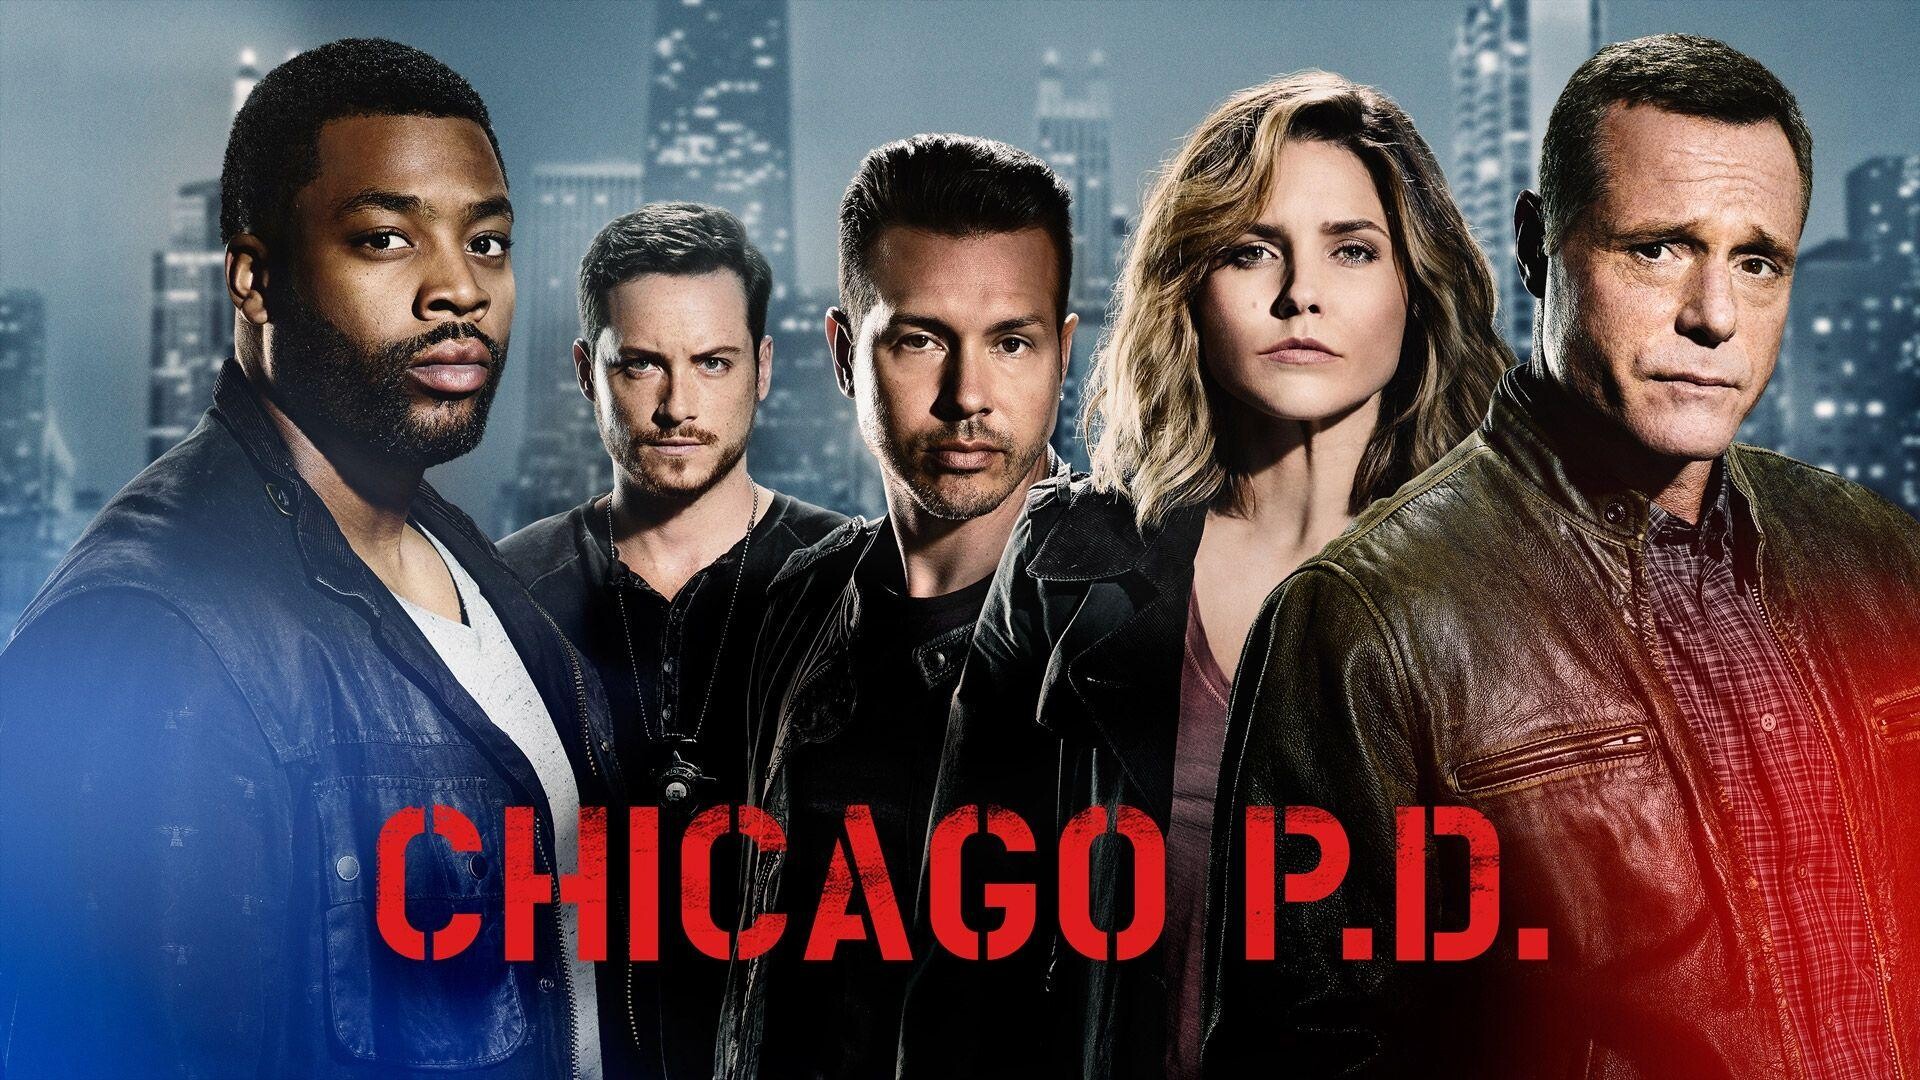 Chicago P.D. (TV Series): Main Characters Of the NBS TV Show, Hank Voight, Kevin Atwater, Jay Halstead, Antonio Dawson, Erin Lindsay. 1920x1080 Full HD Wallpaper.